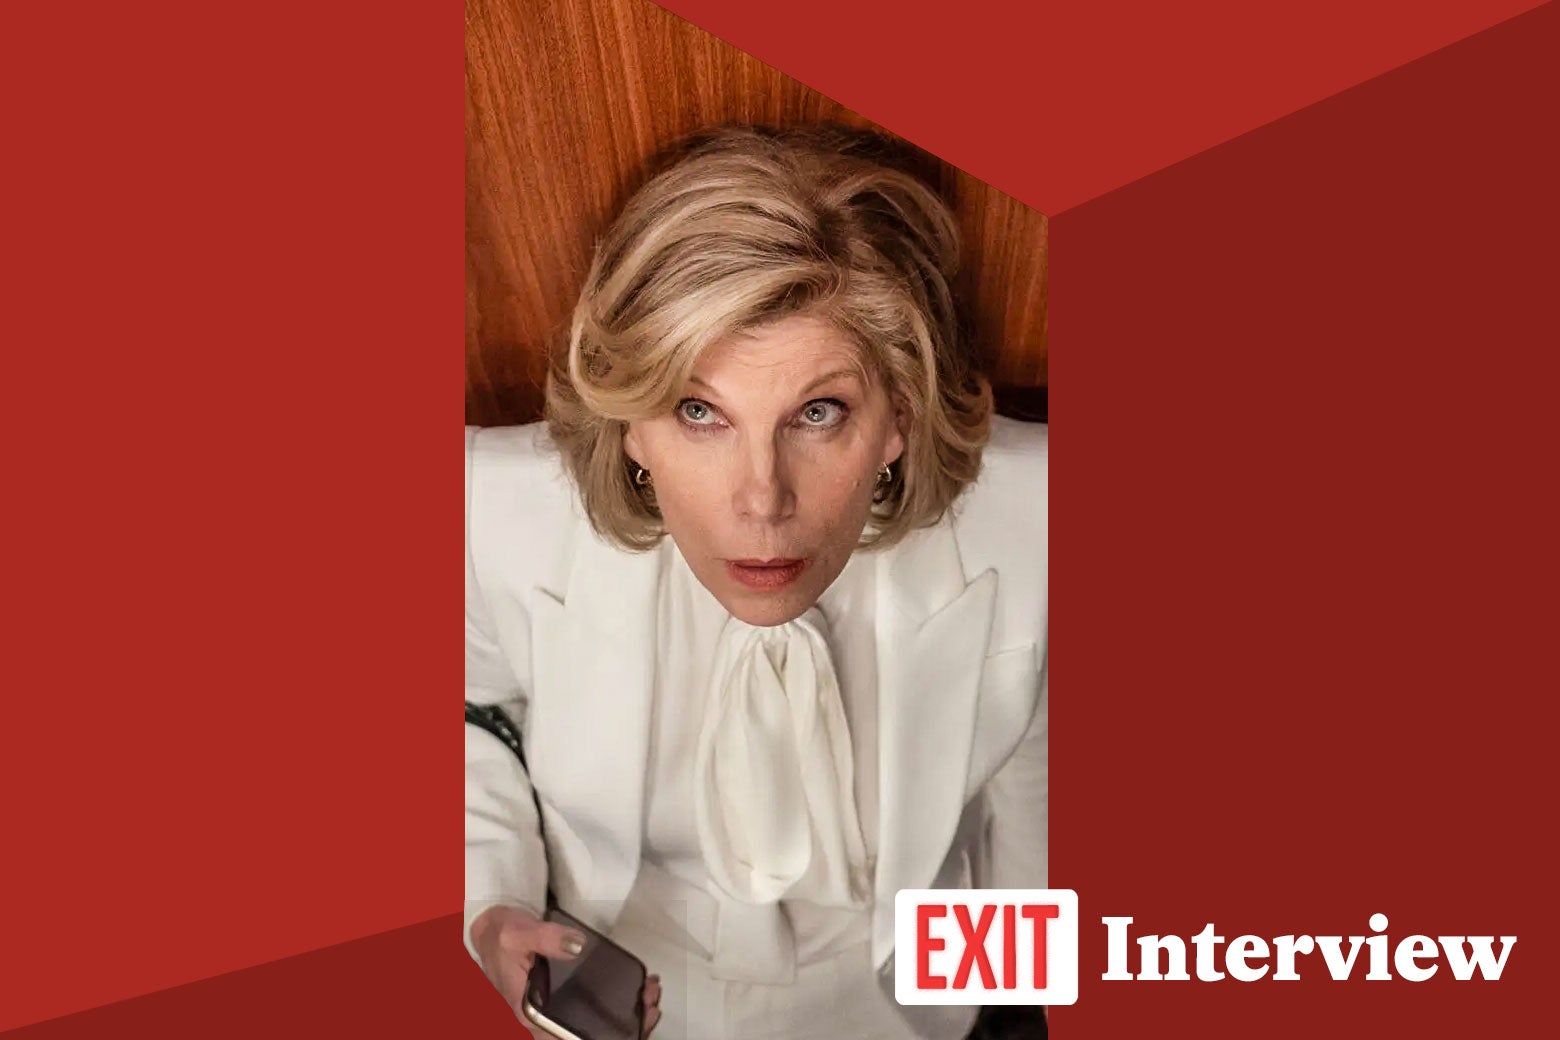 Christine Baranski seen through an opening in a red box, with a tearaway reading "Exit Interview" on bottom right